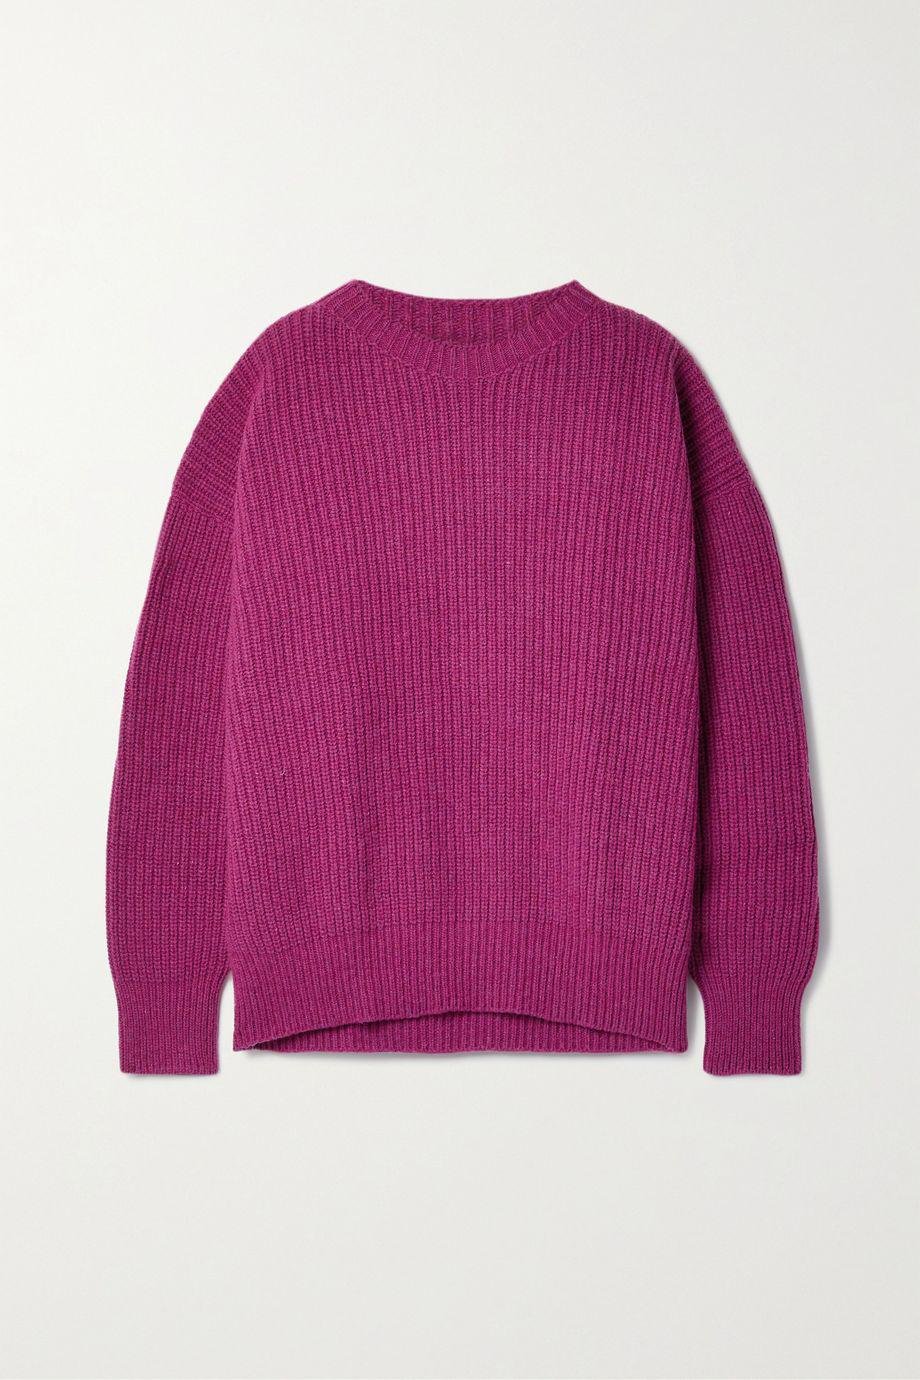 Mea ribbed recycled wool-blend sweater by BASERANGE